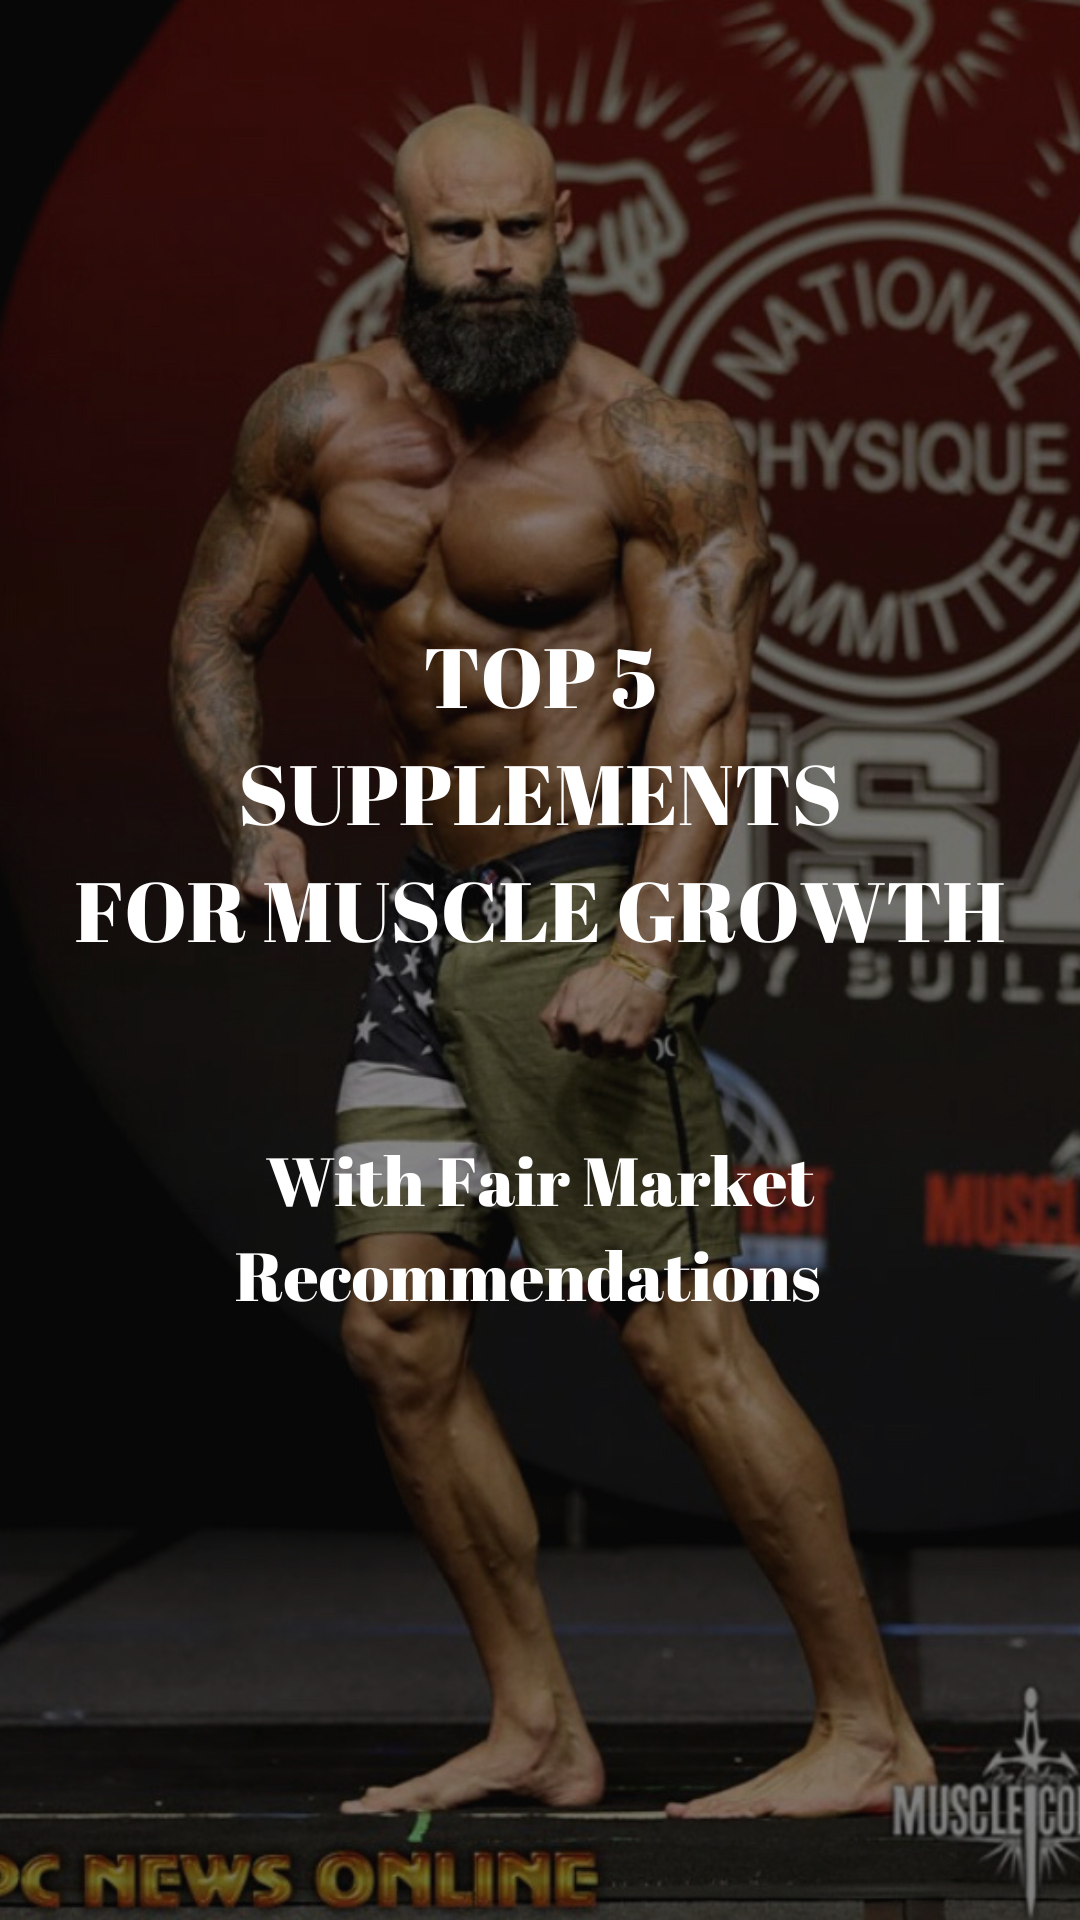 TOP 5 SUPPLEMENTS FOR MUSCLE GAIN